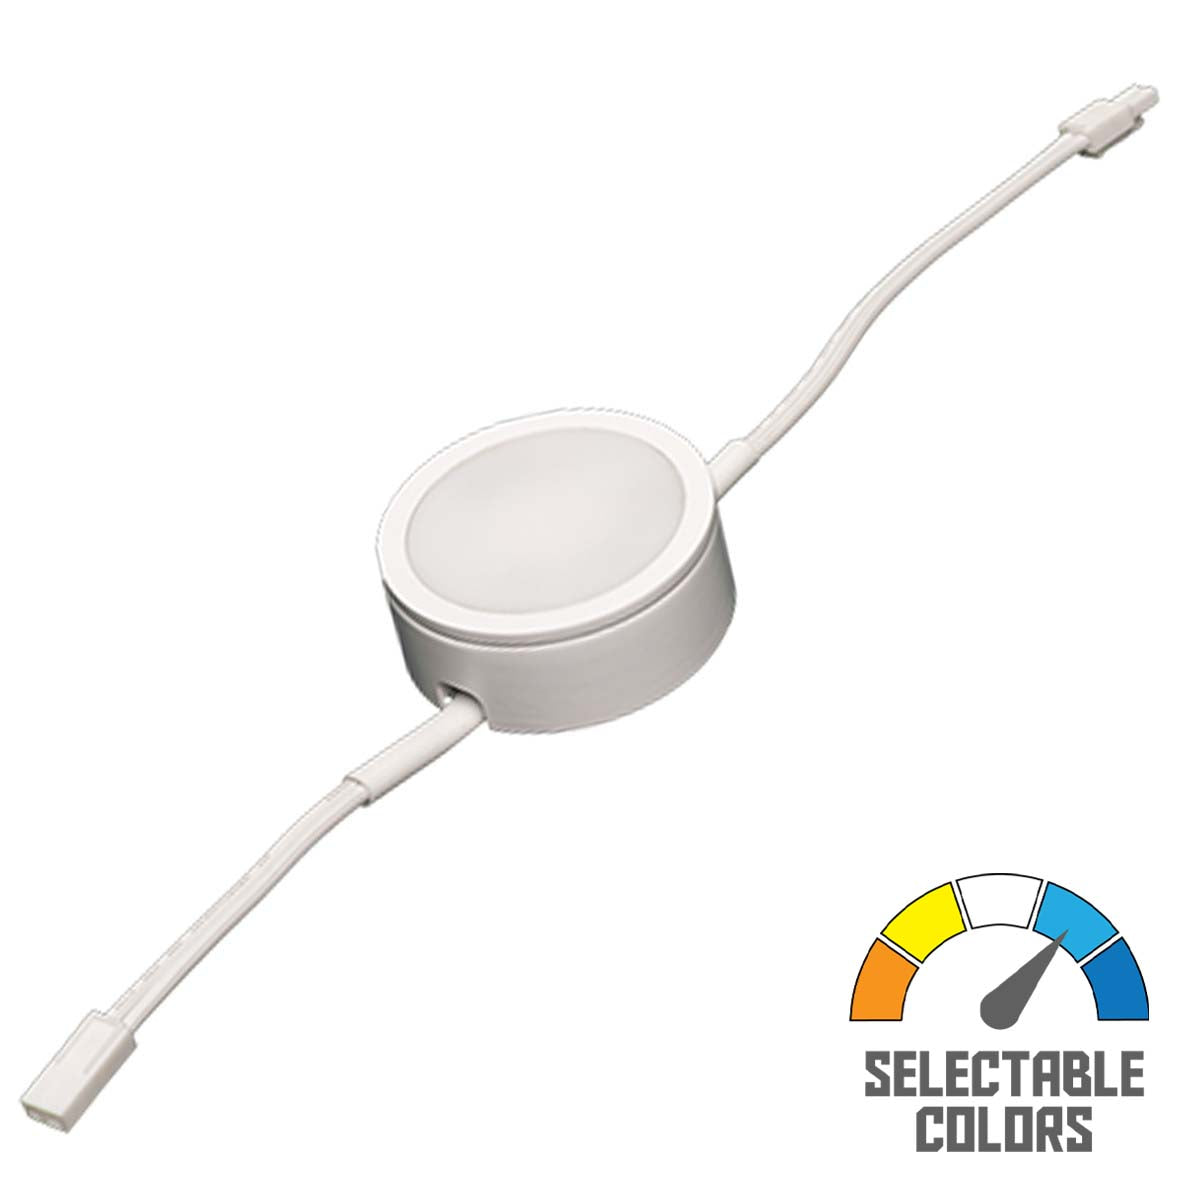 MVP LED Puck Light with Double 6in Lead Wire, Selectable CCT 2700K to 5000K, 120V, White